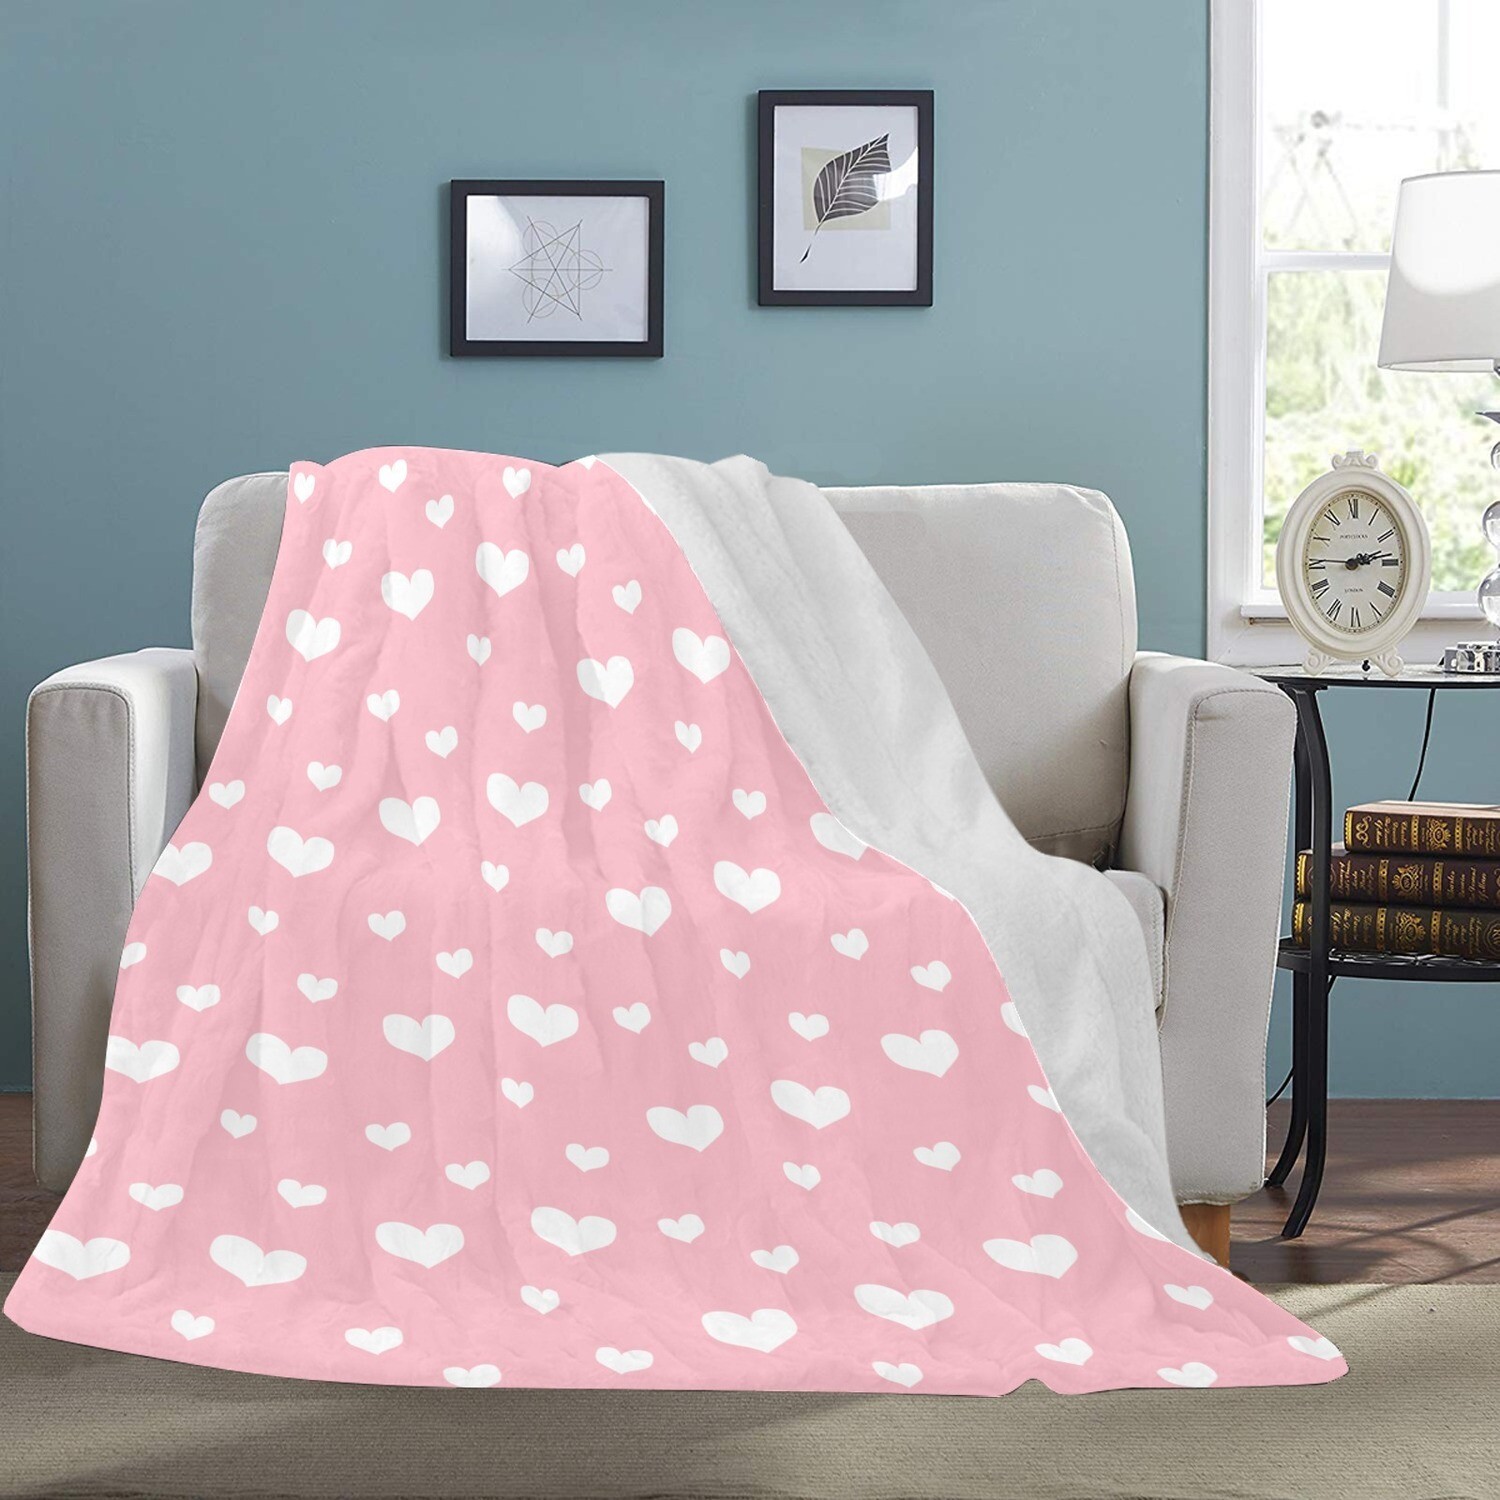 🤴🏽👸🏽💕Large Ultra-Soft Micro Fleece Blanket Valentine white hearts on baby pink, gift, gift for her, gift for him, gift for them, 70"x80"